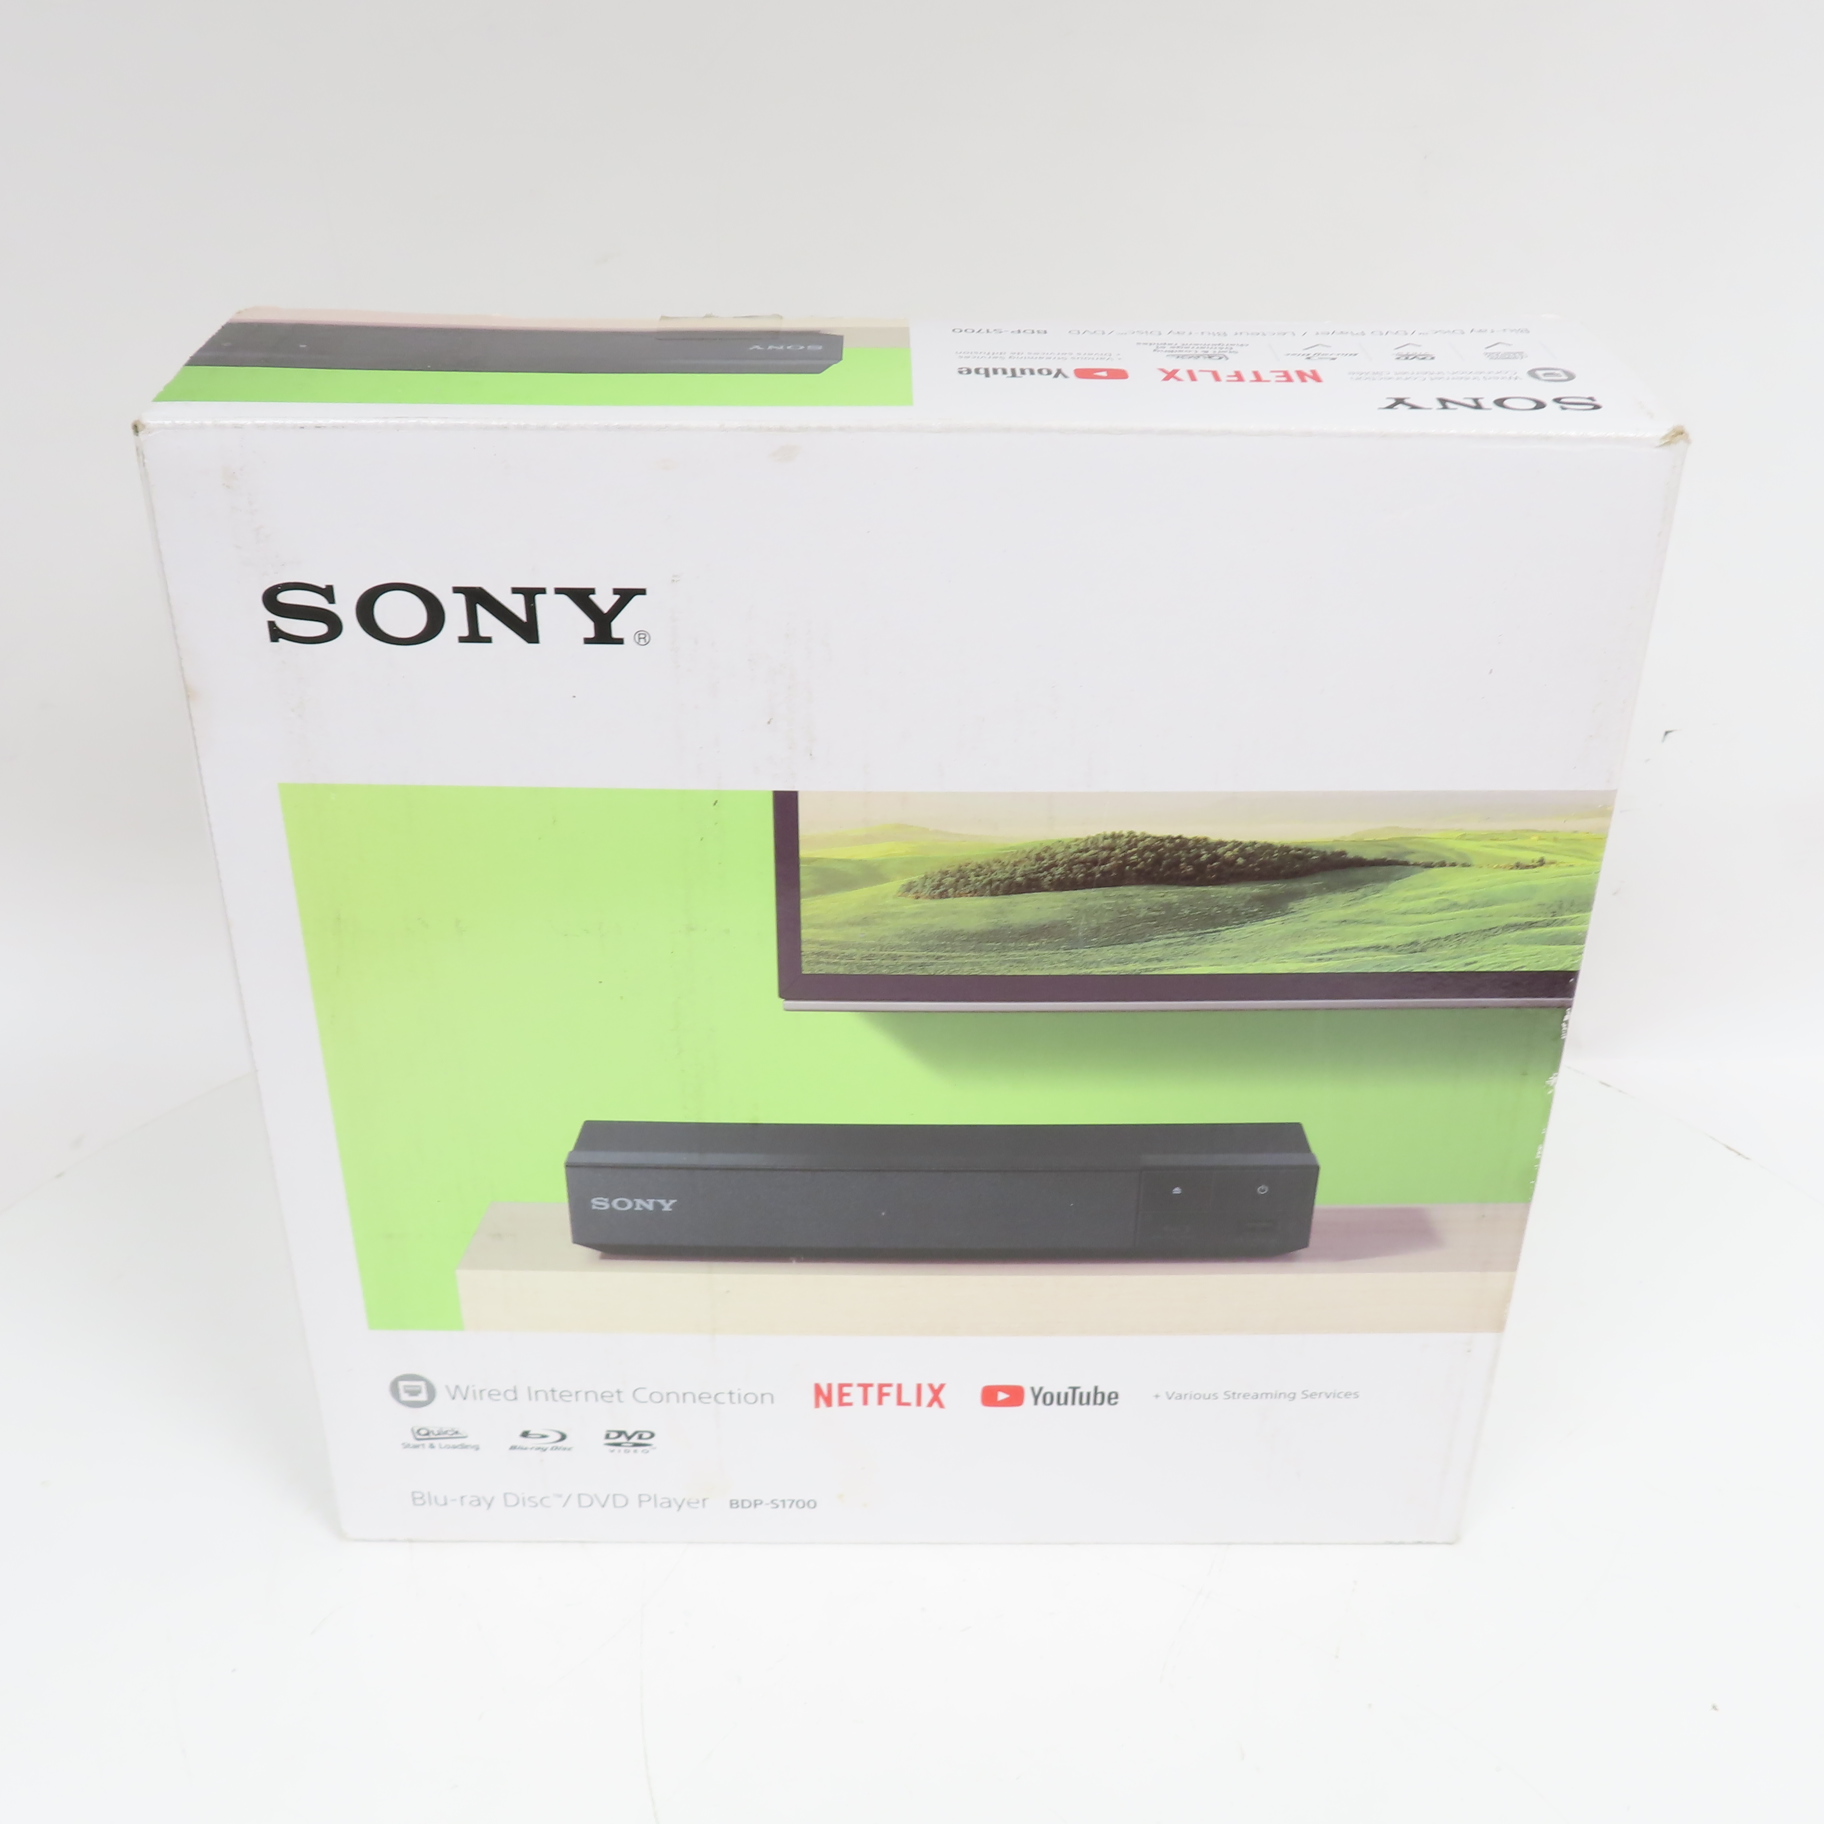 Sony BDP-S1700 Wi-Fi Box) Blu-Ray/DVD (In Connected Player